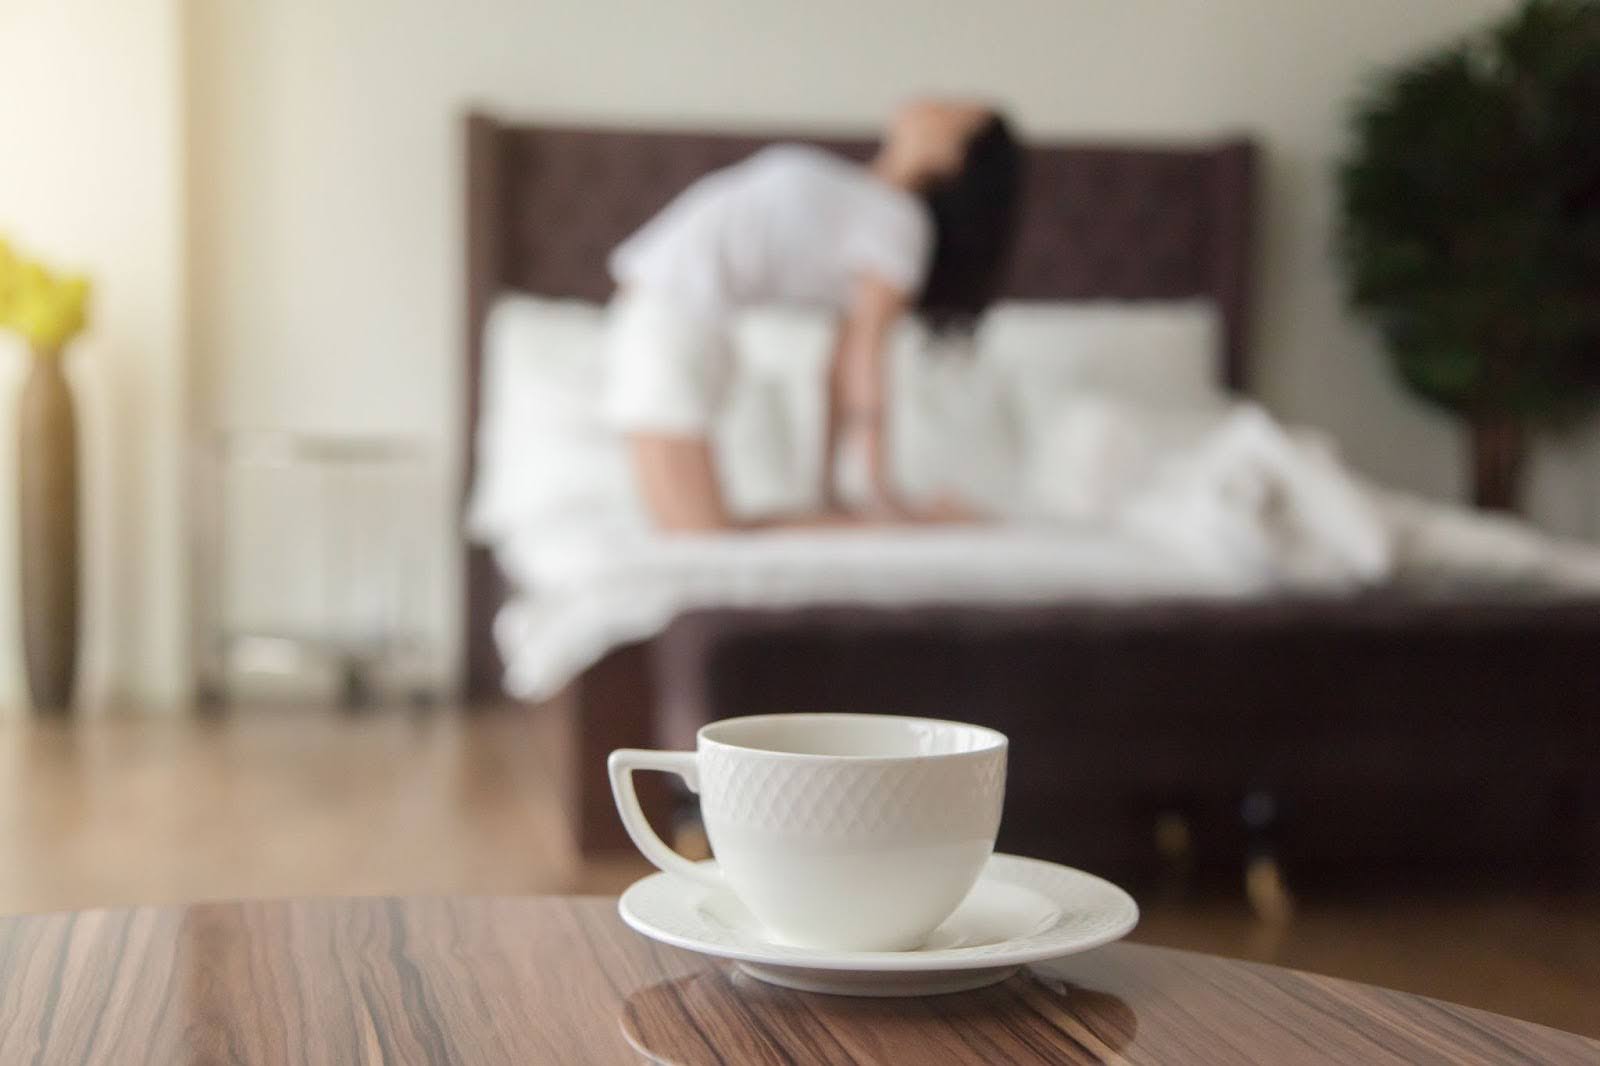 Fit woman stretching in her bed, about to drink a cup of coffee before her workout